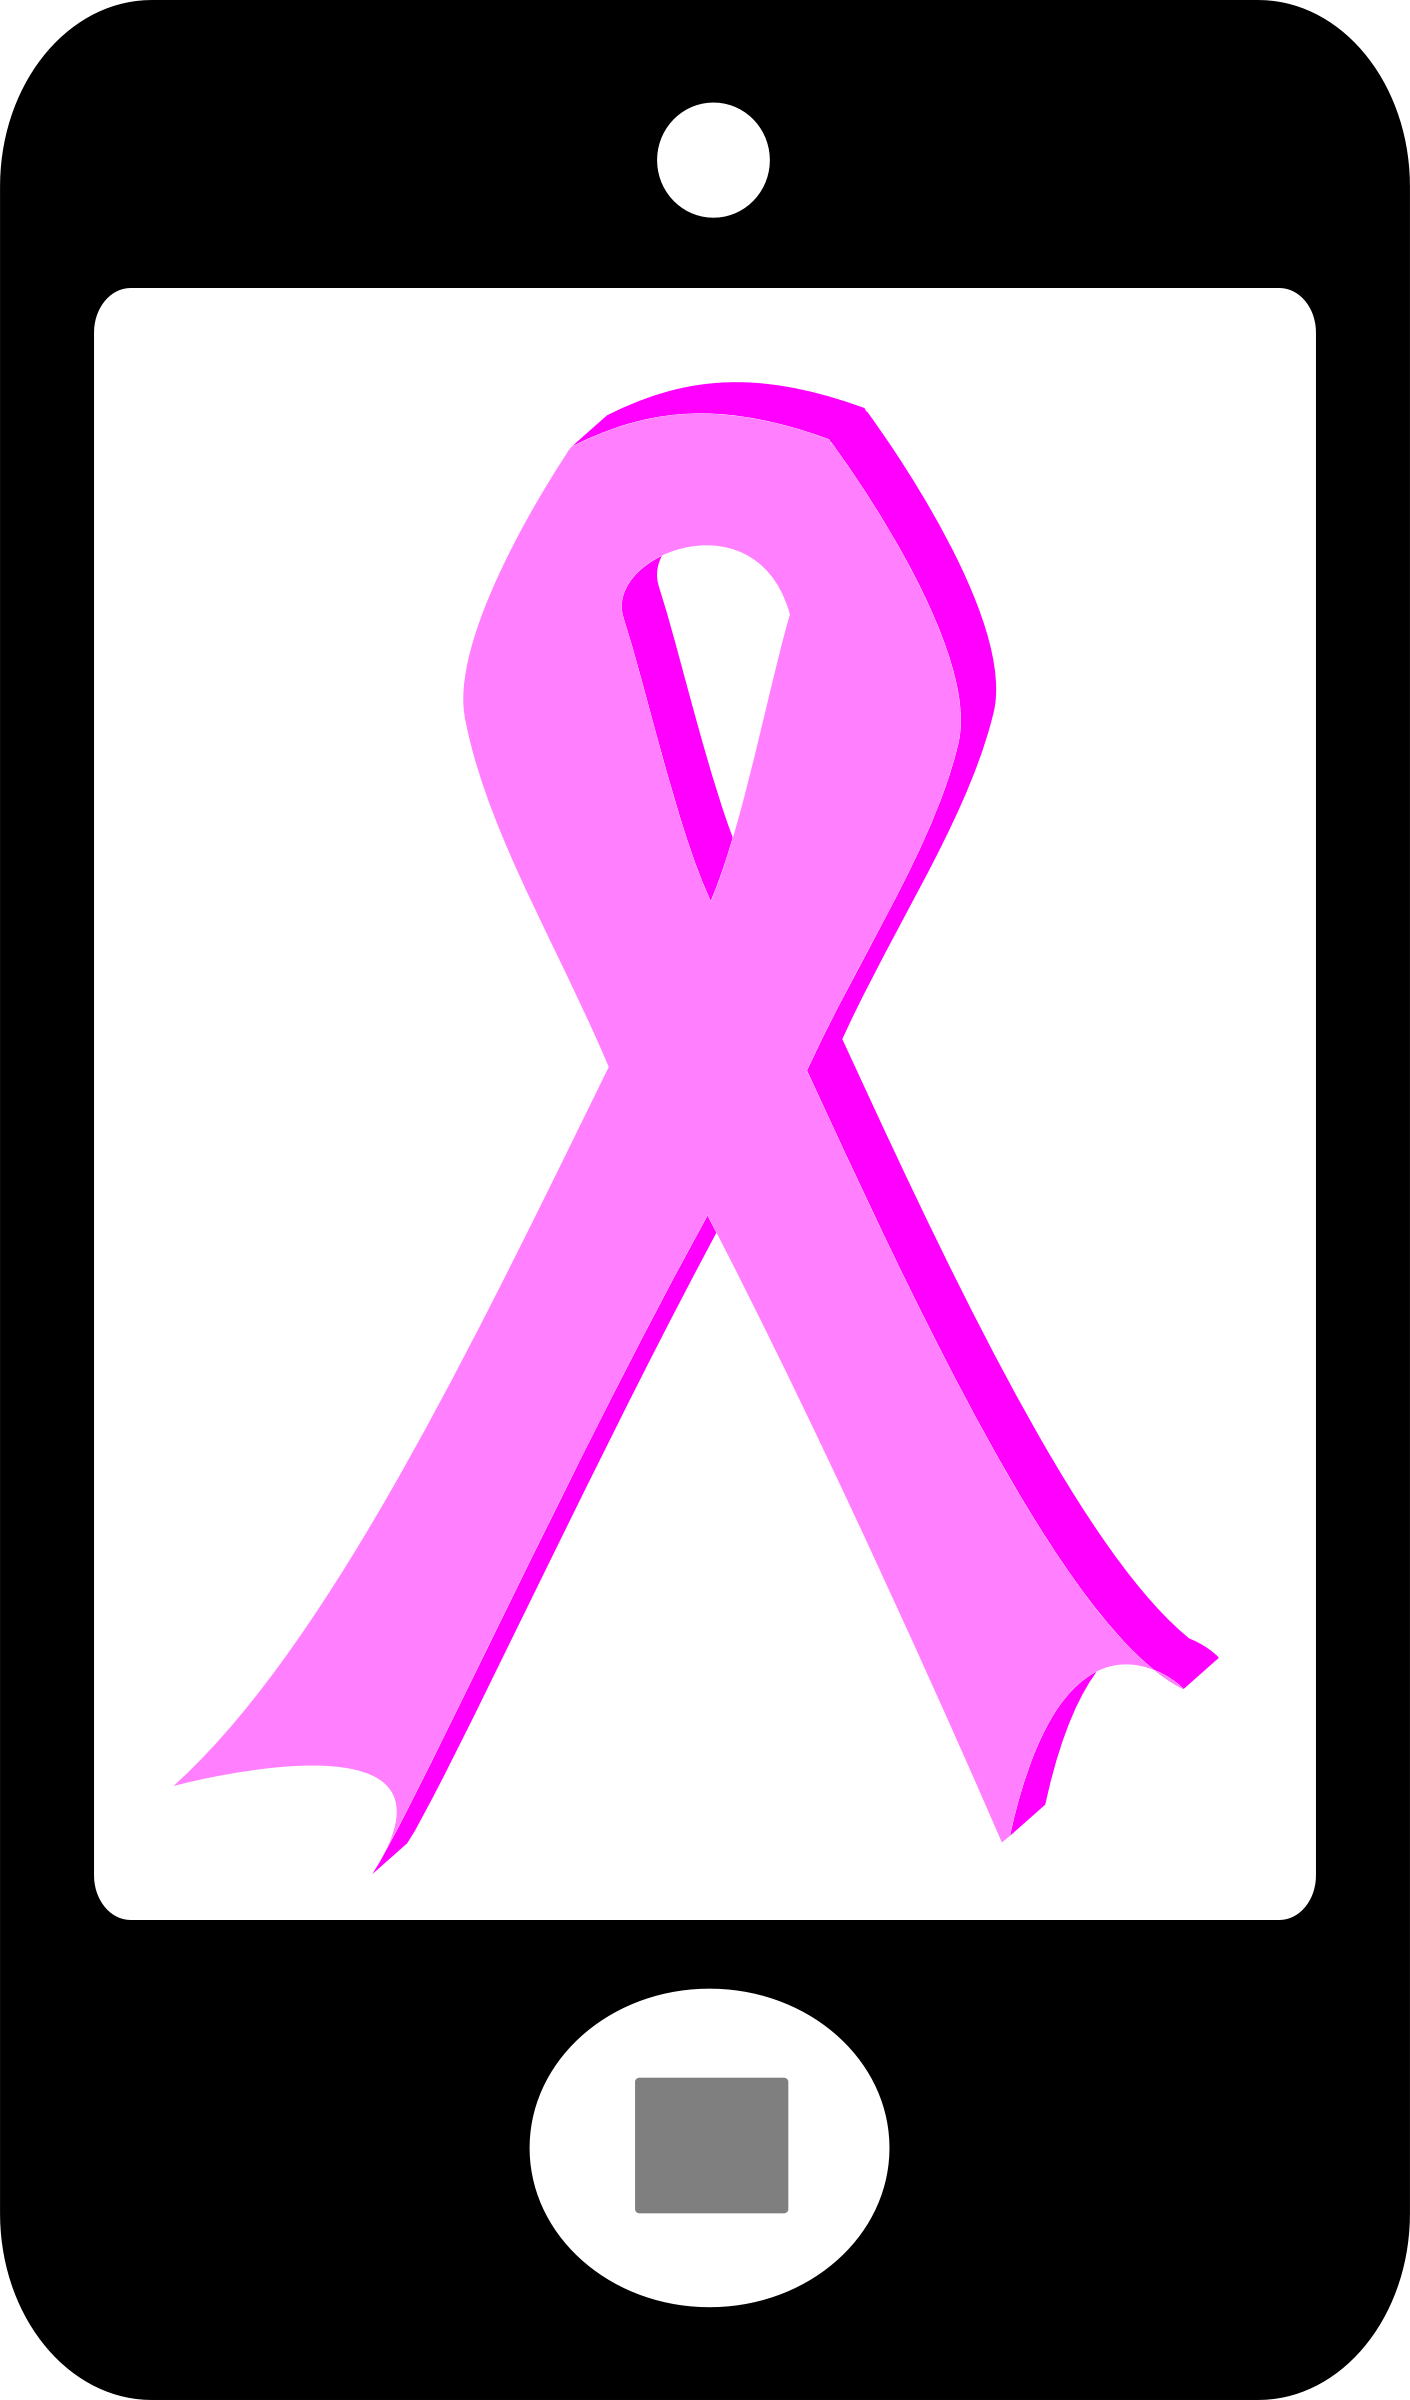 With Pink Ribbon - Mobile Phone (1410x2400)